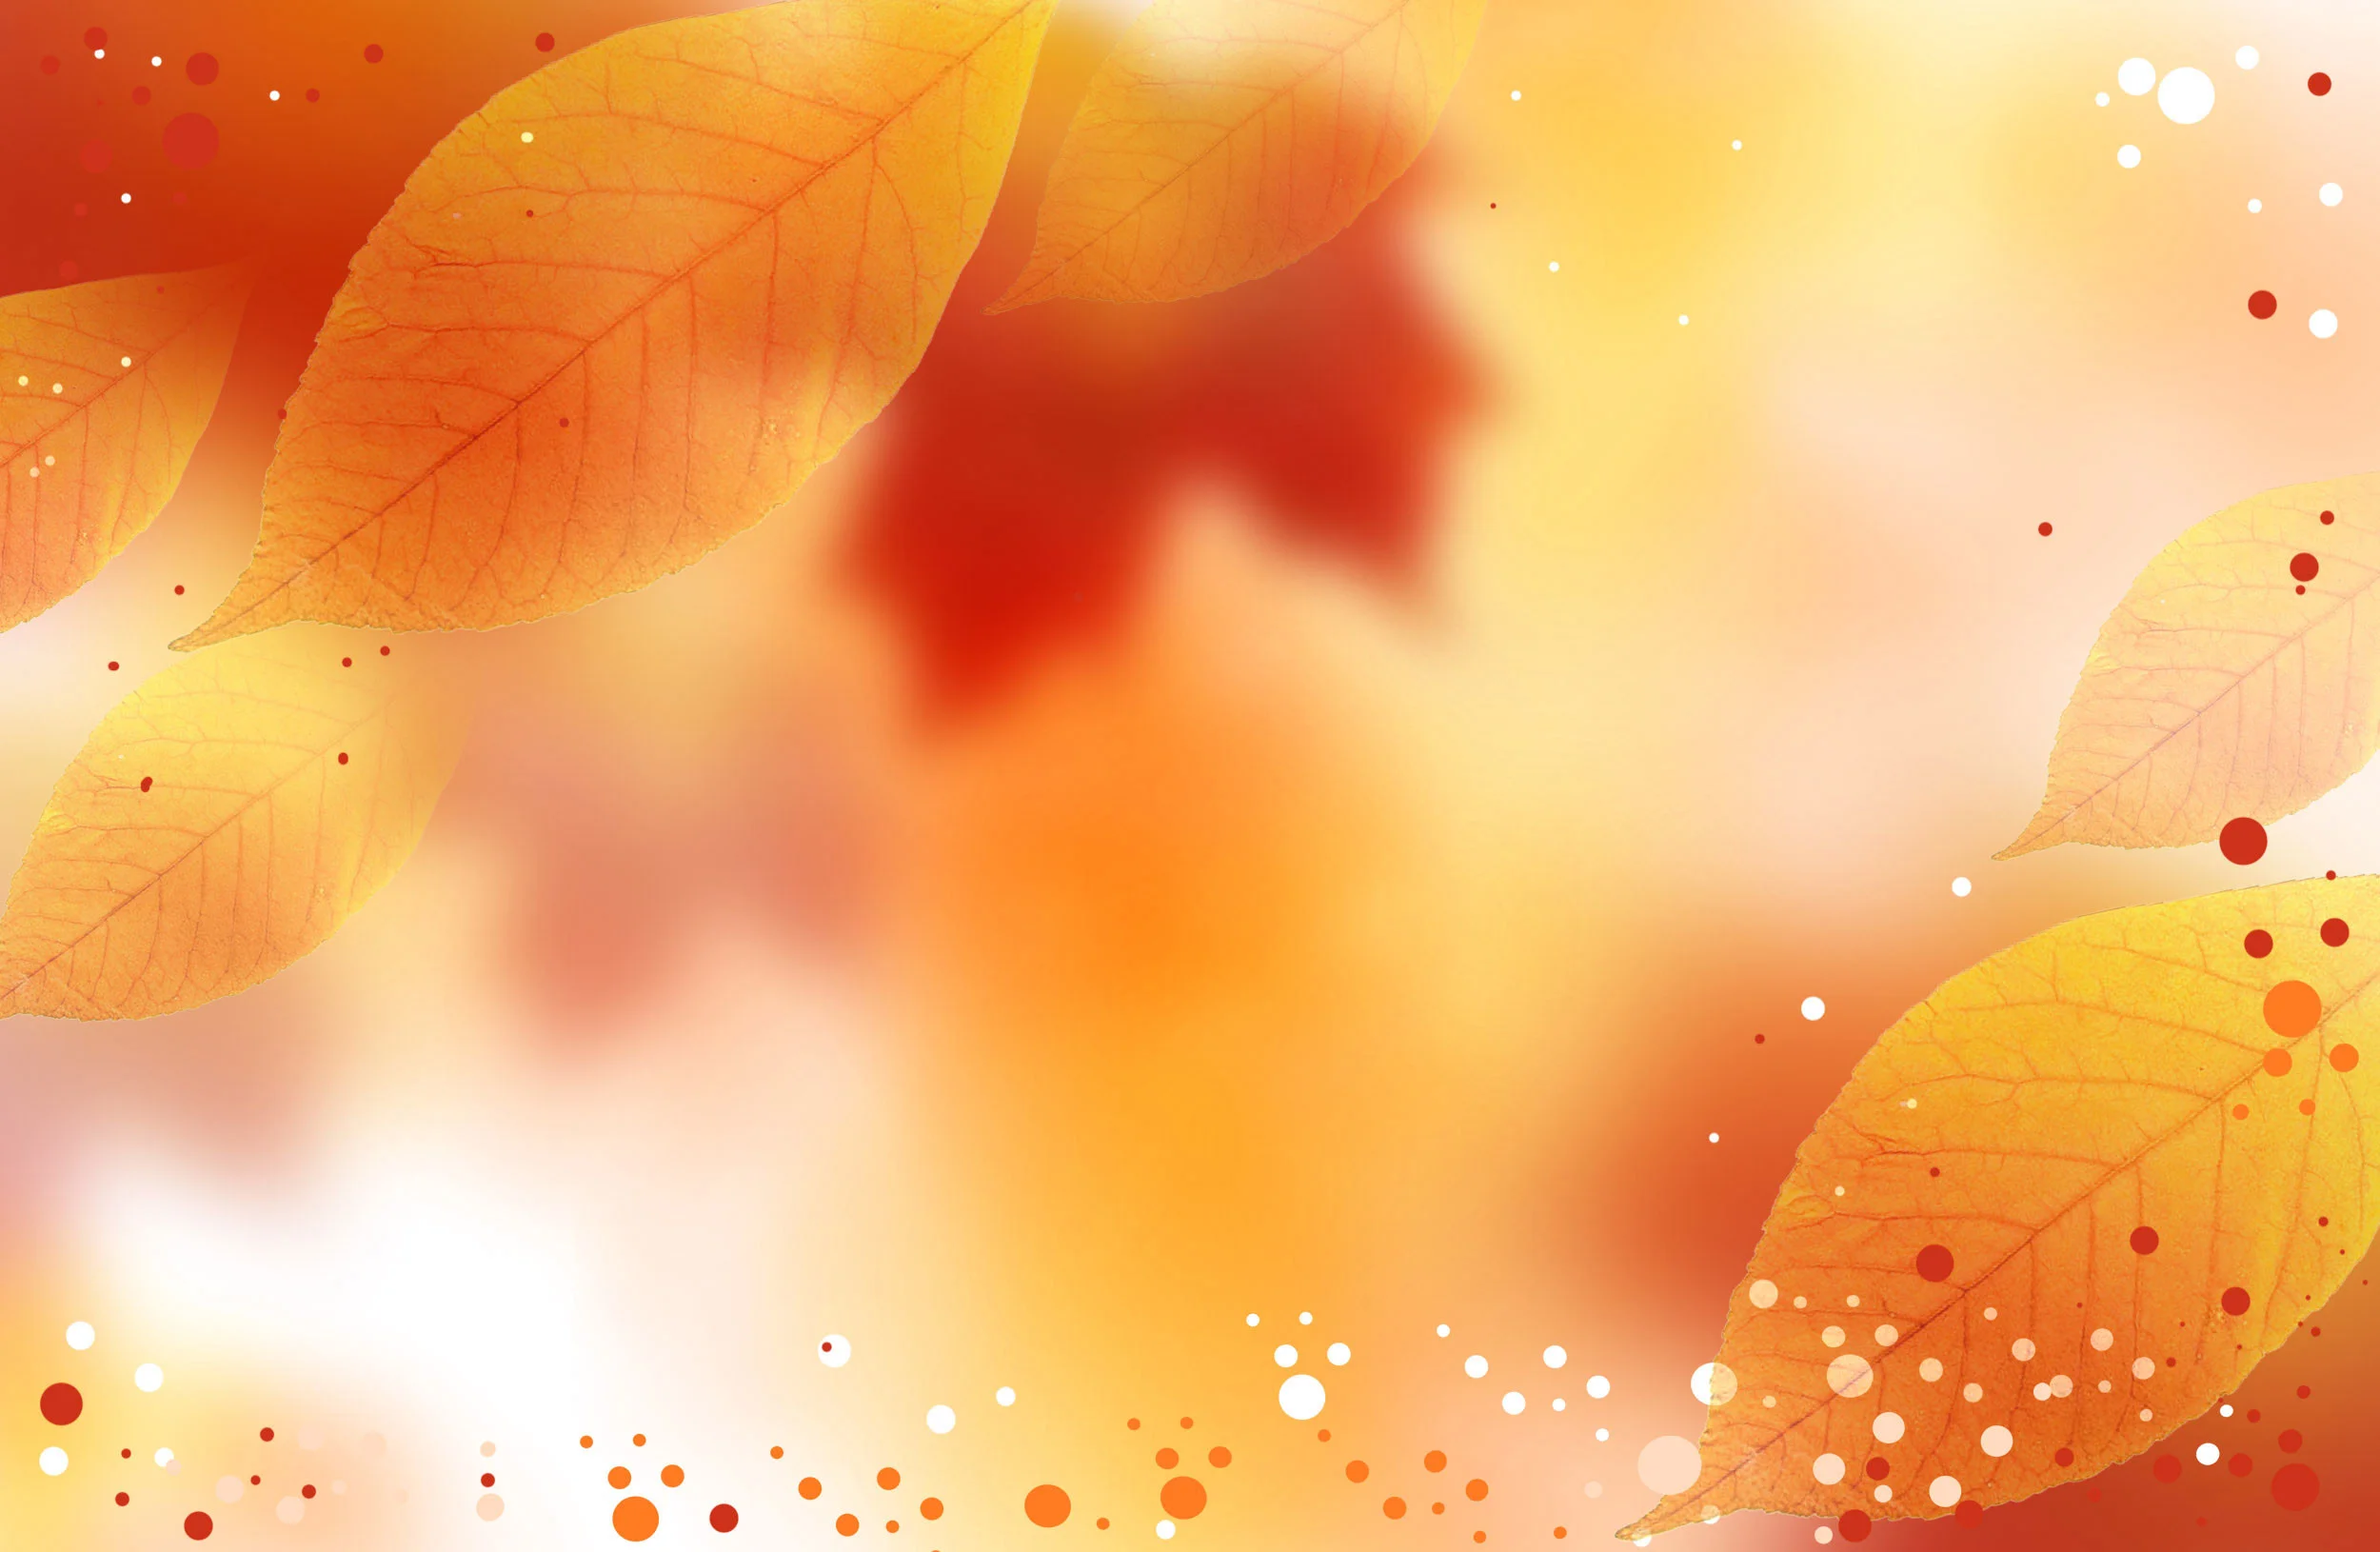 Fall colors on the background with Autumn leaves and white, orange and red  dots as spread and highlights.